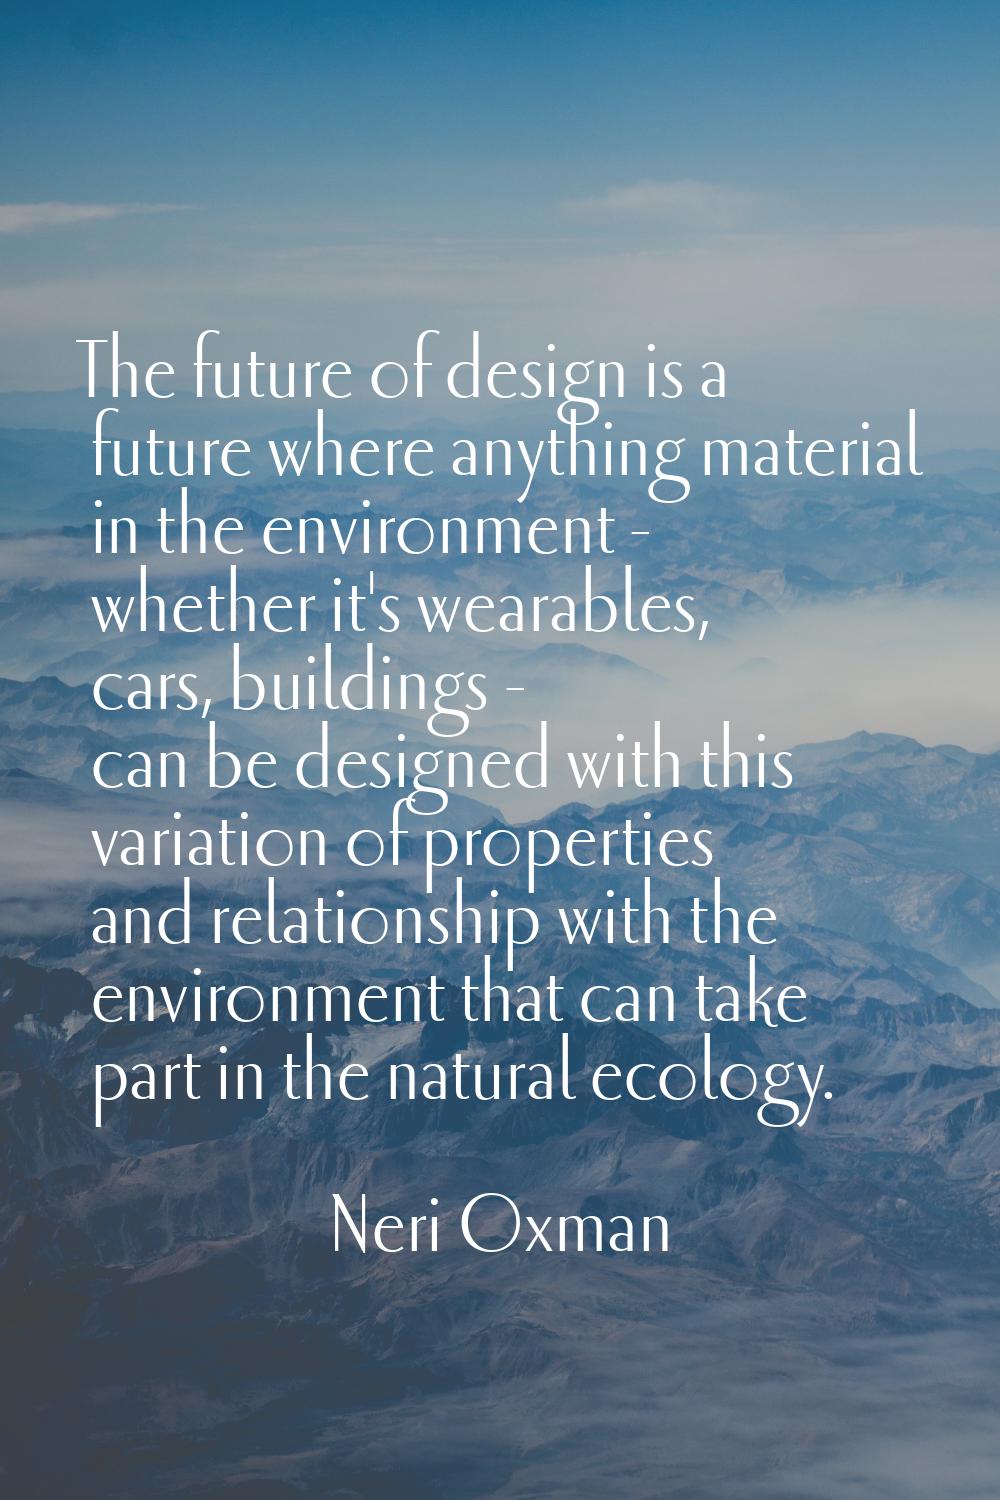 The future of design is a future where anything material in the environment - whether it's wearable